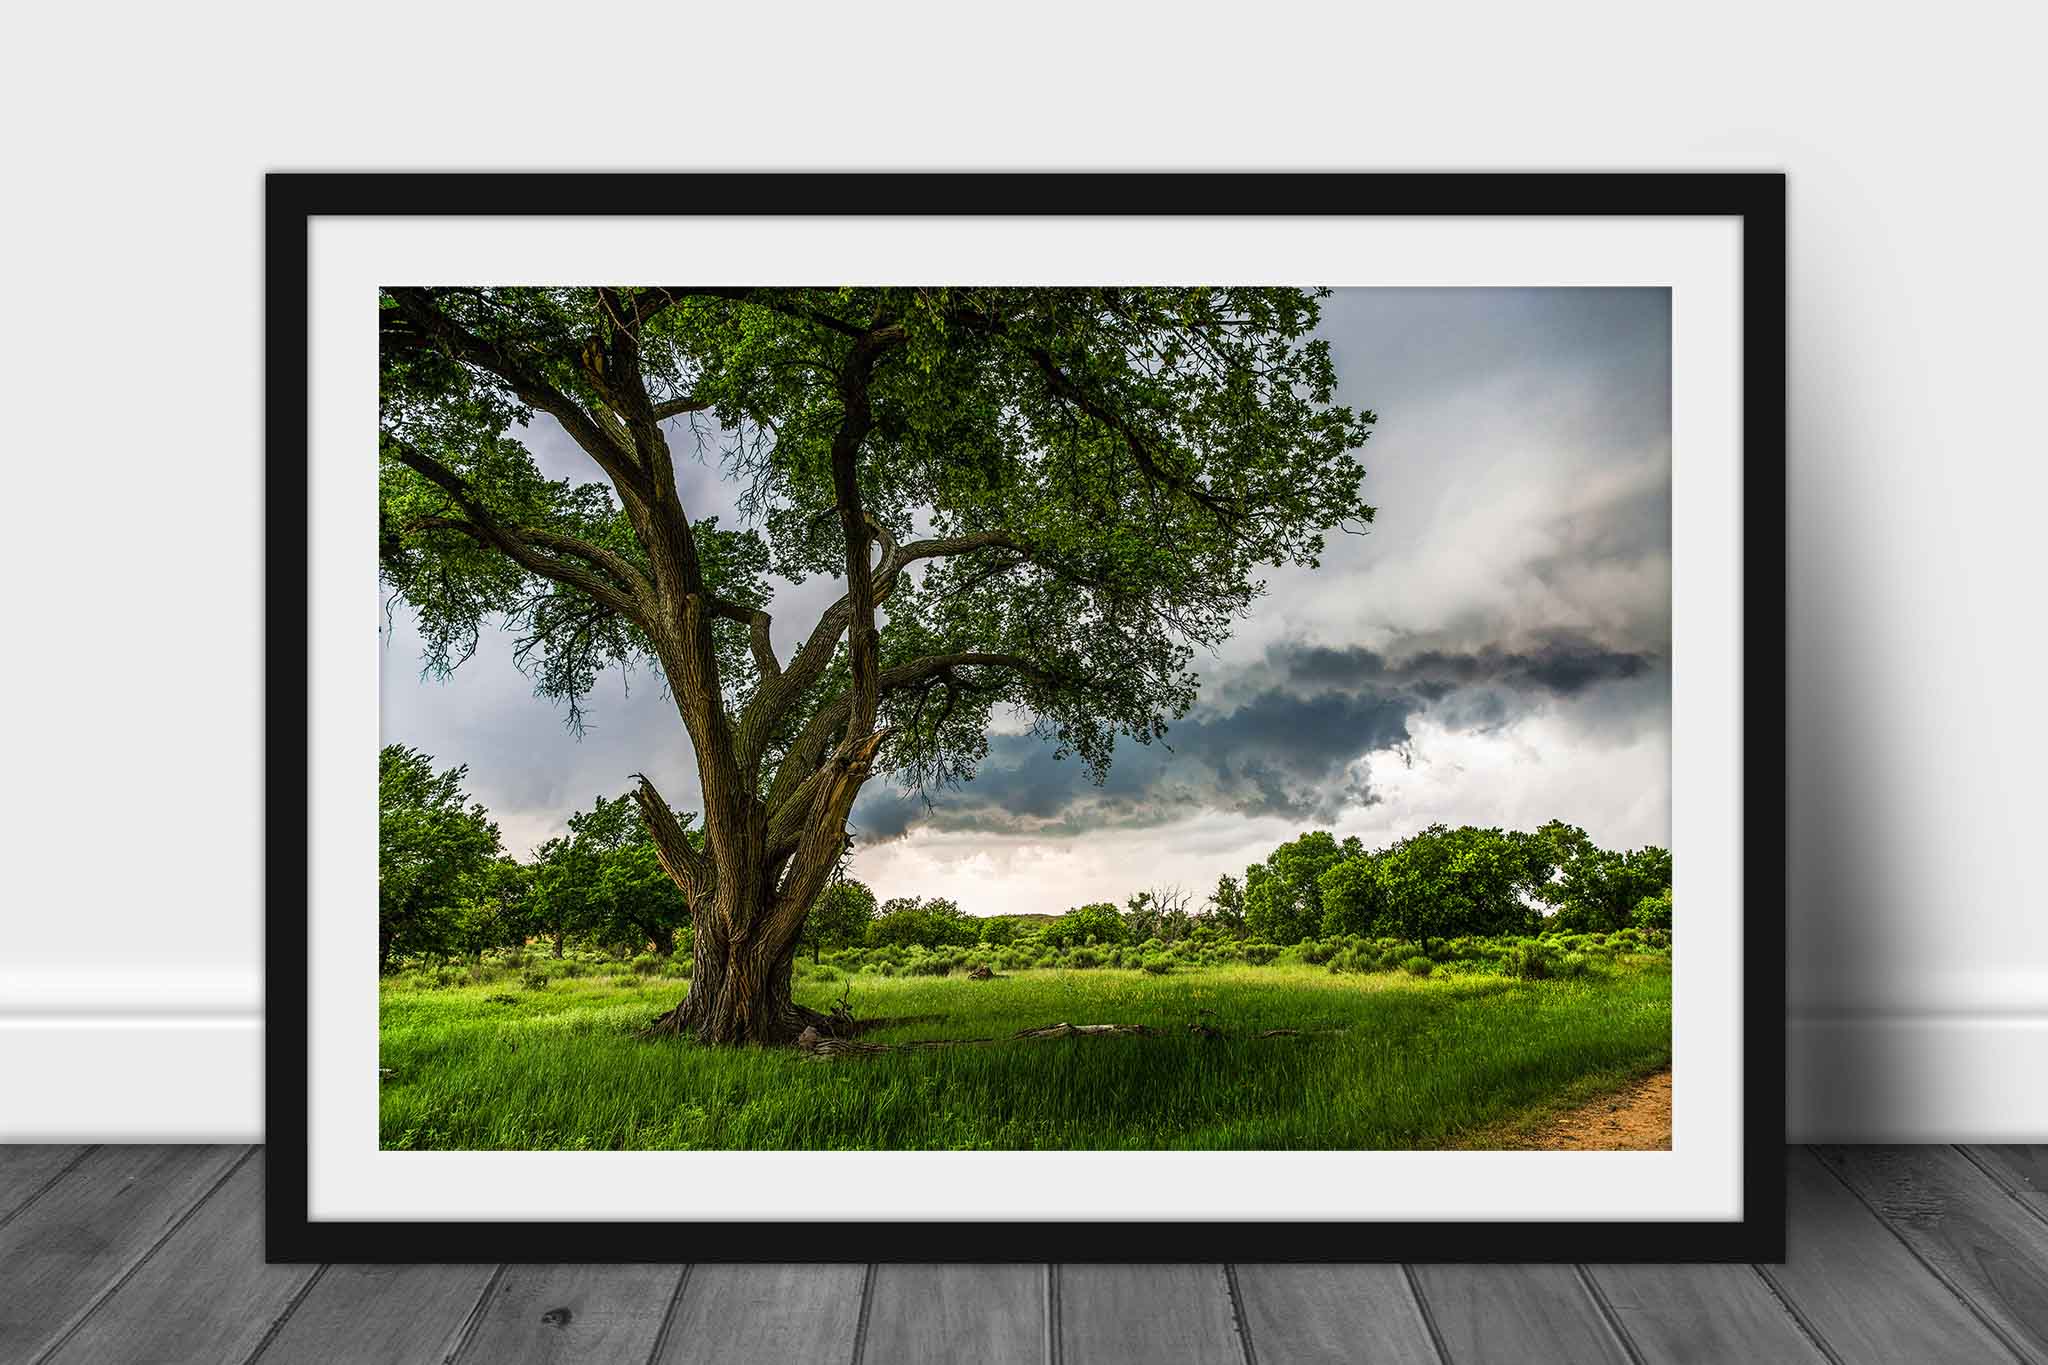 Framed nature print of a large cottonwood tree and storm clouds on a stormy spring day in the Texas panhandle by Sean Ramsey of Southern Plains Photography.